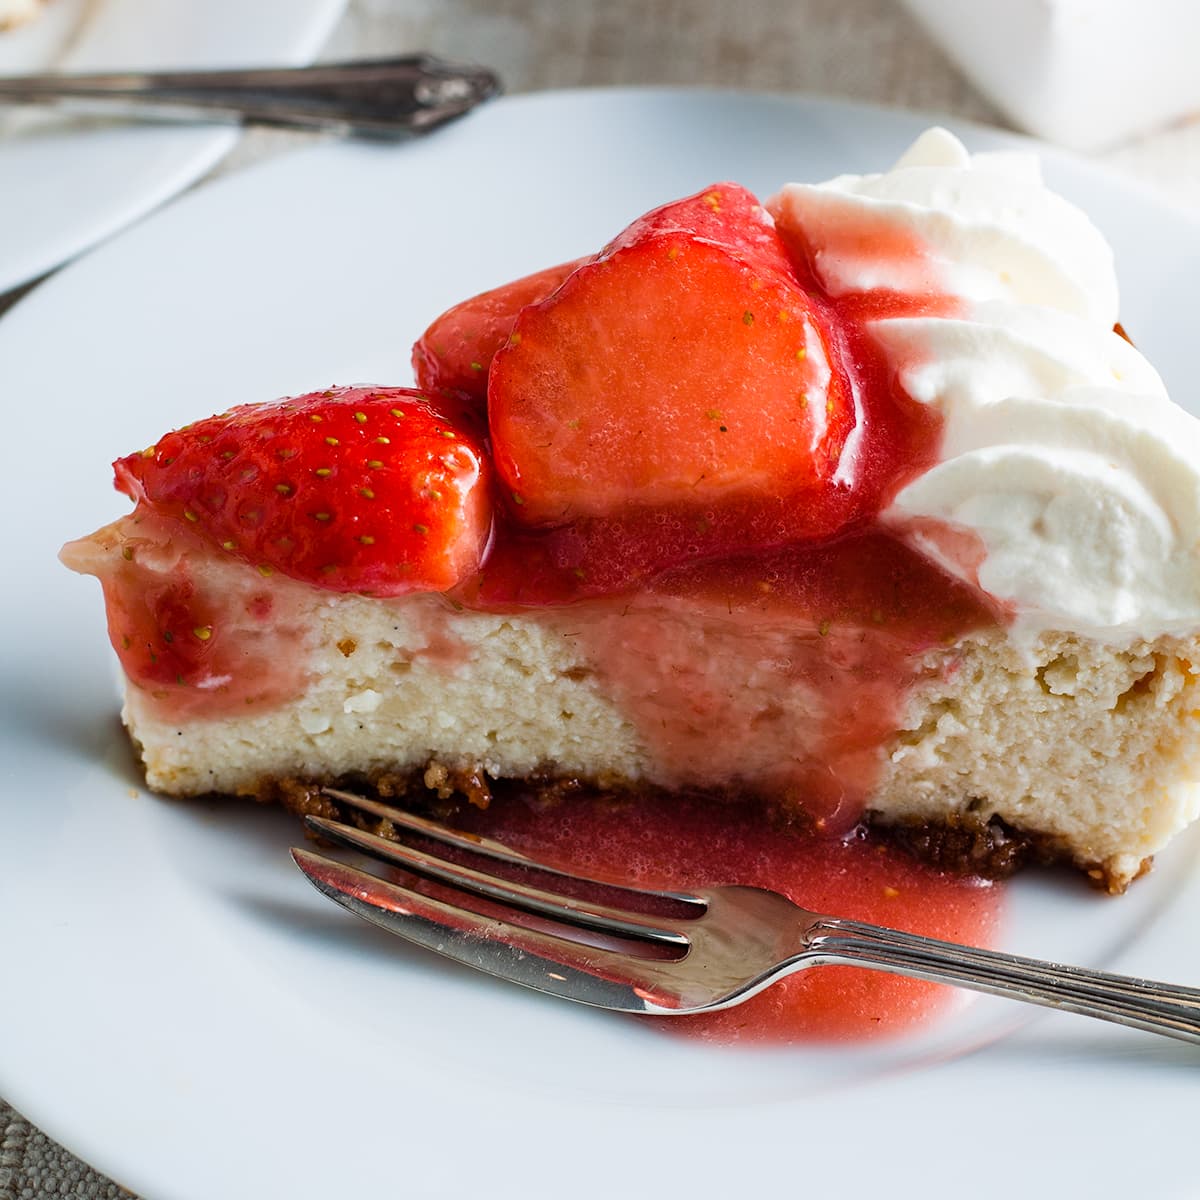 slice of baked strawberry cheesecake on white late with dessert fork.